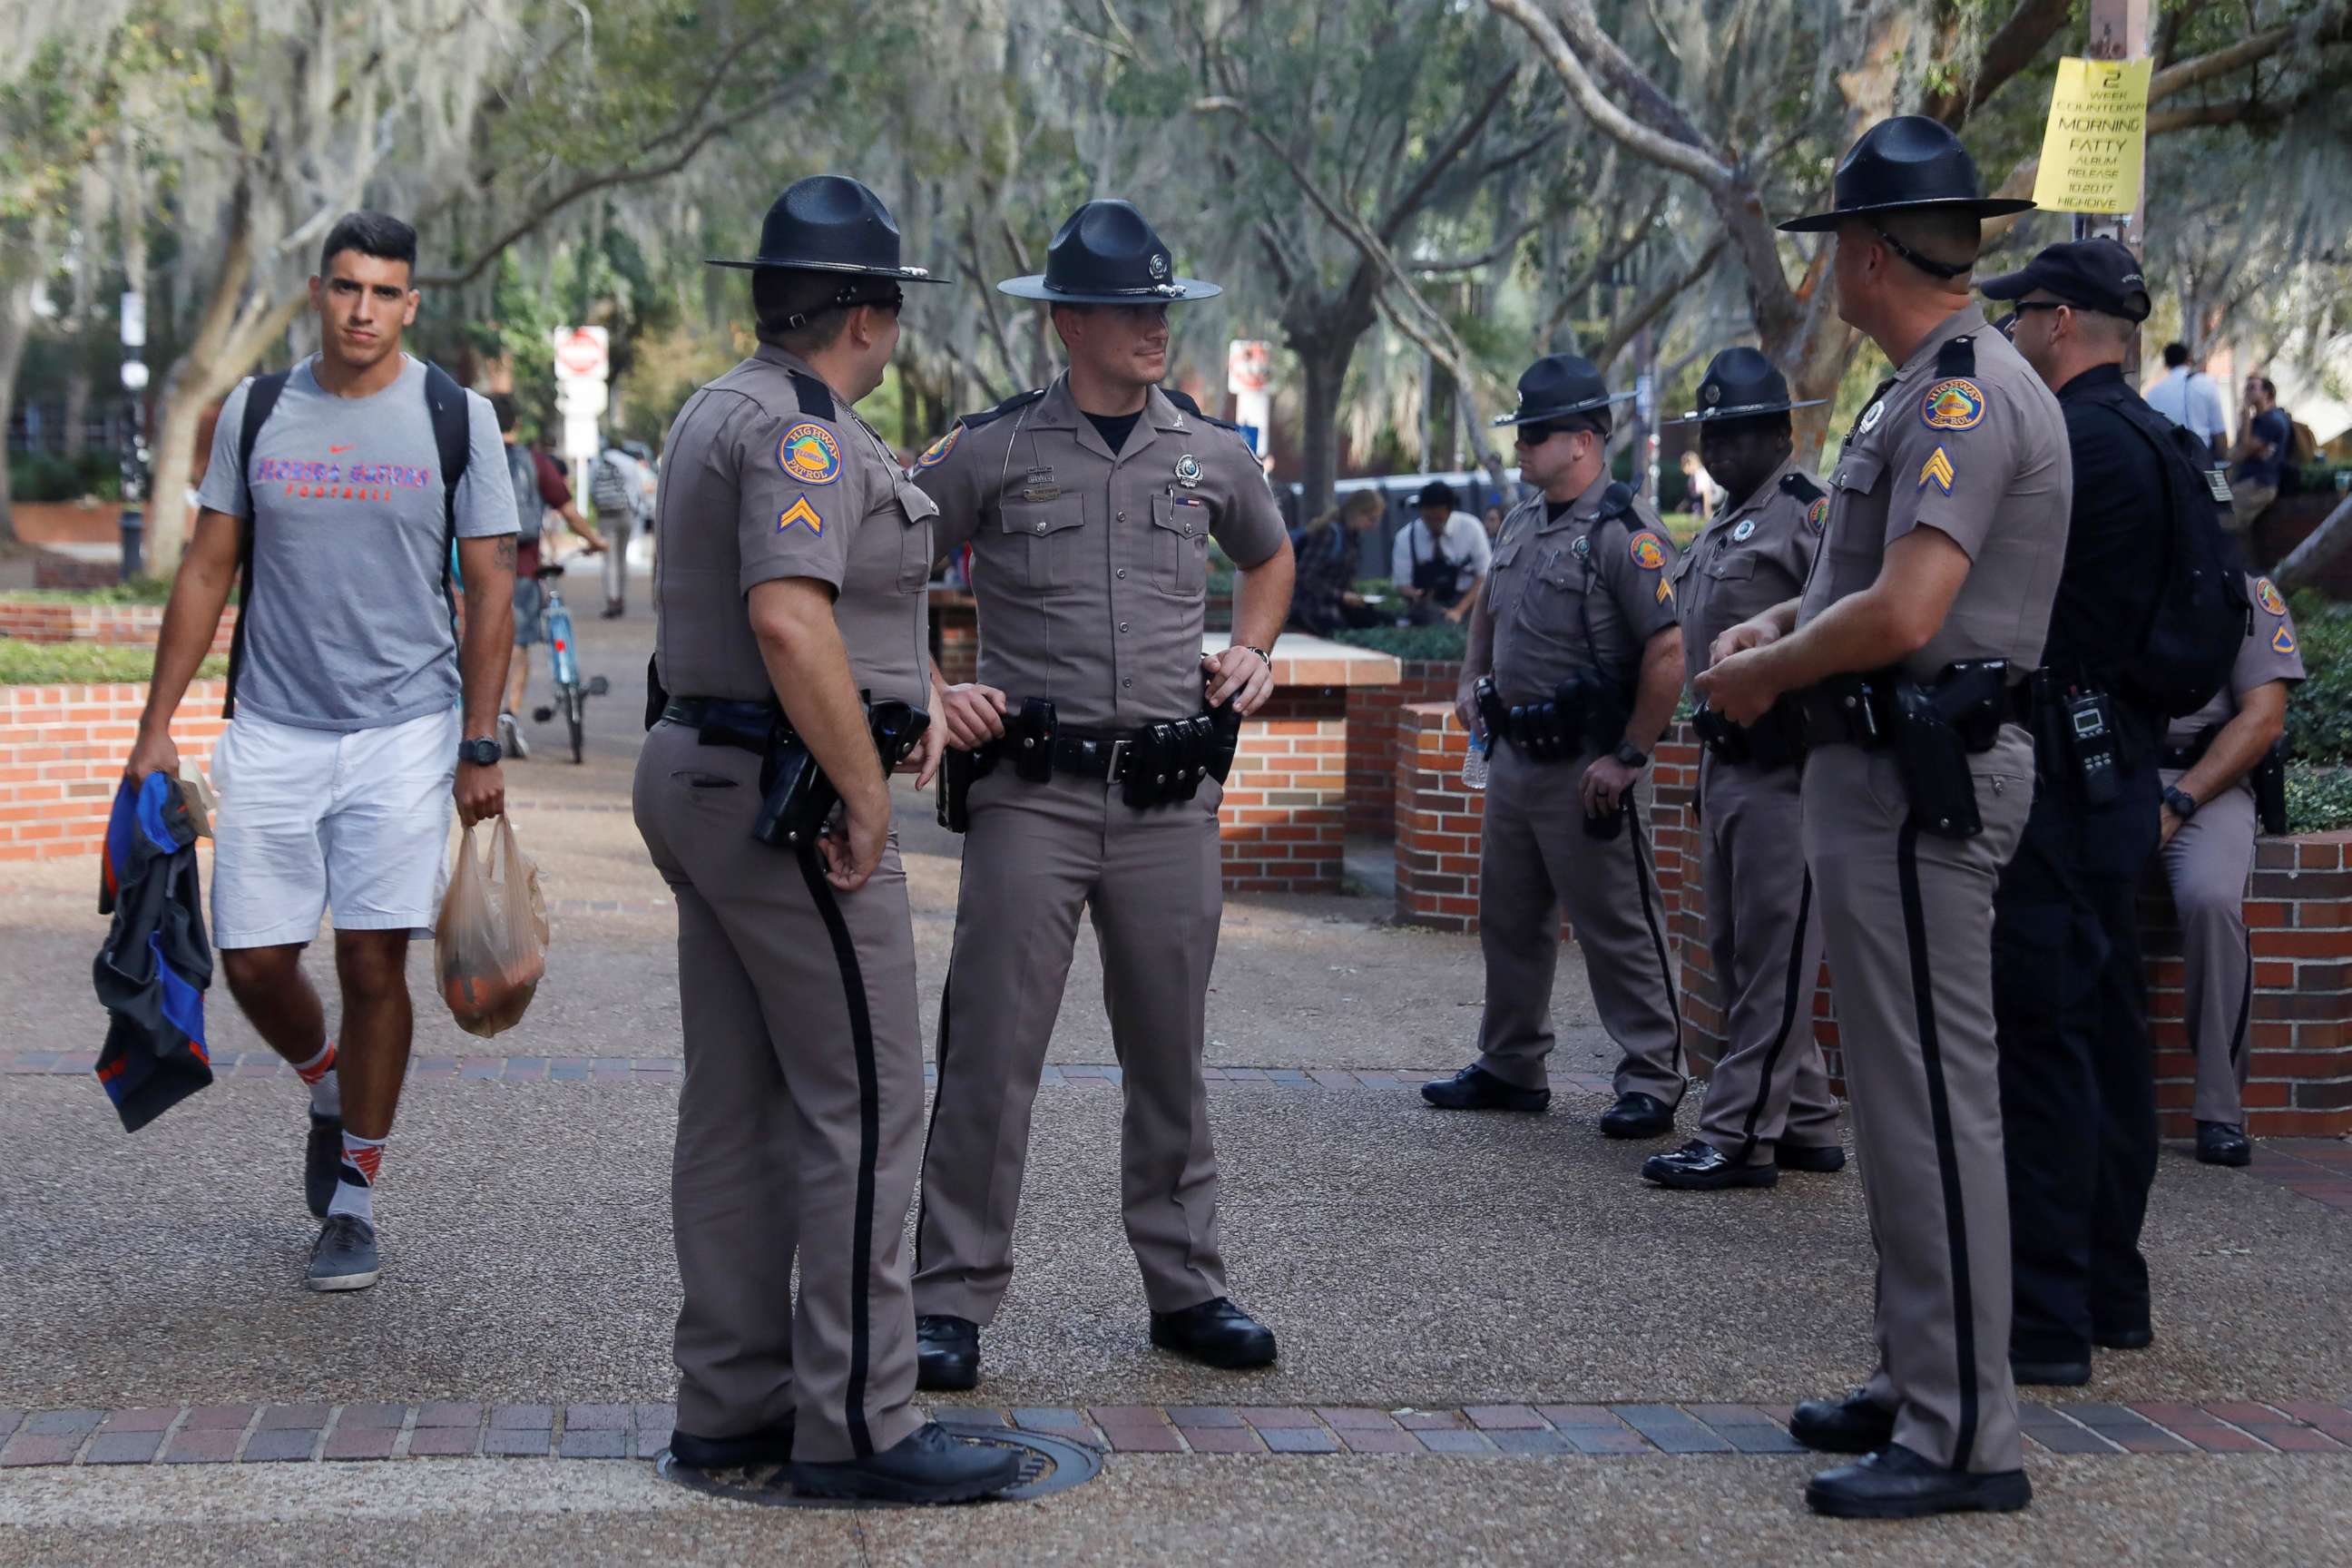 PHOTO: Florida Highway Patrol officers stand guard the day before a speech by Richard Spencer, an avowed white nationalist and spokesperson for the so-called alt-right movement, on the campus of the University of Florida, Oct. 18, 2017.